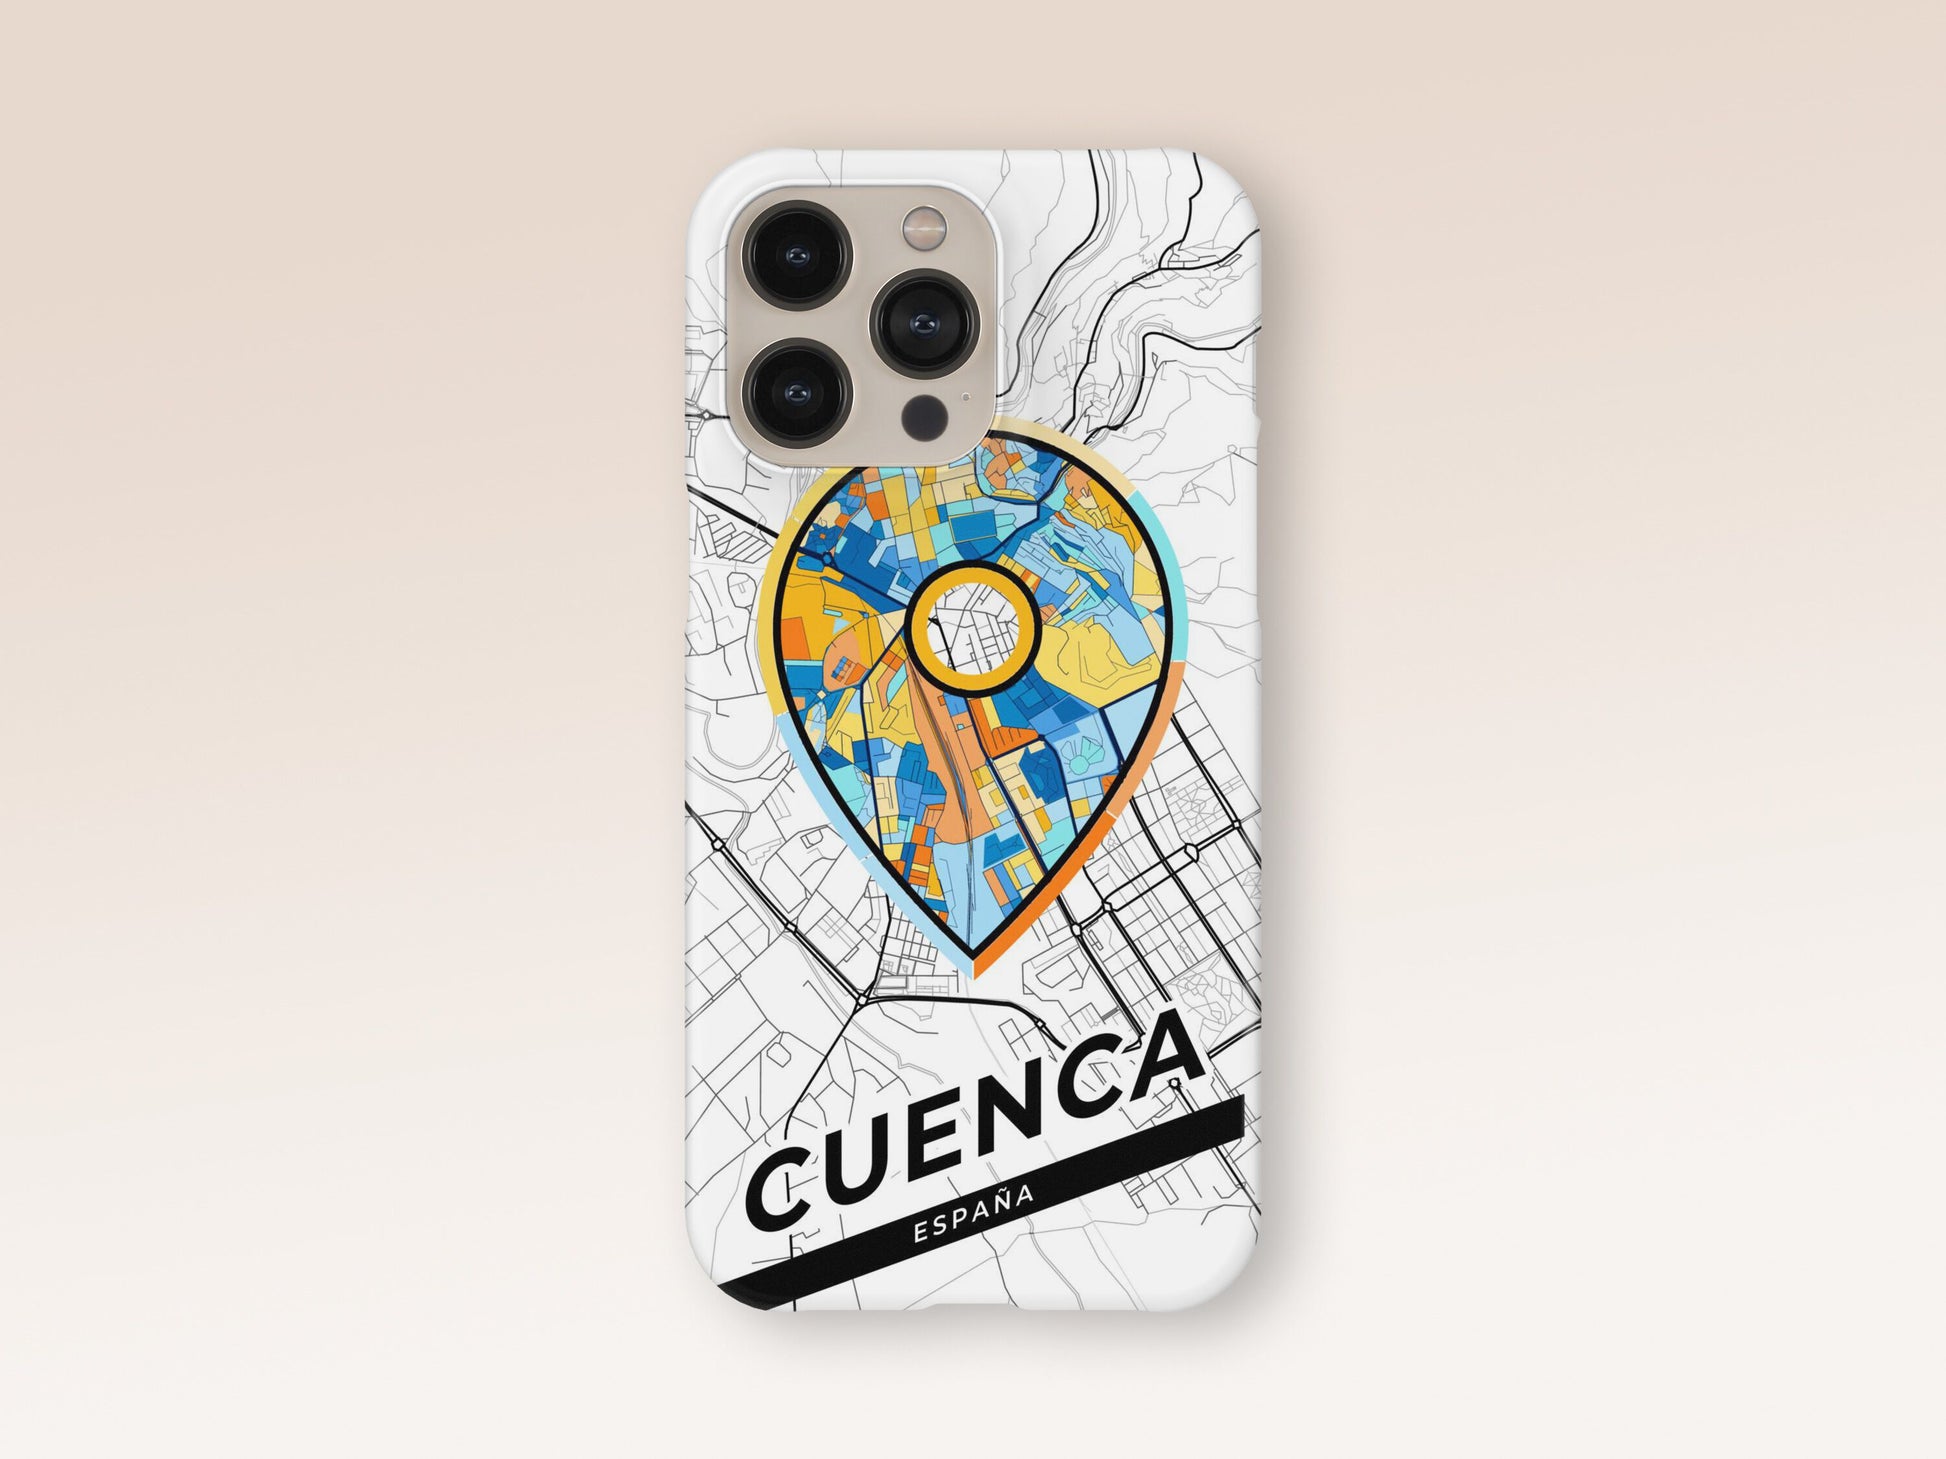 Cuenca Spain slim phone case with colorful icon. Birthday, wedding or housewarming gift. Couple match cases. 1